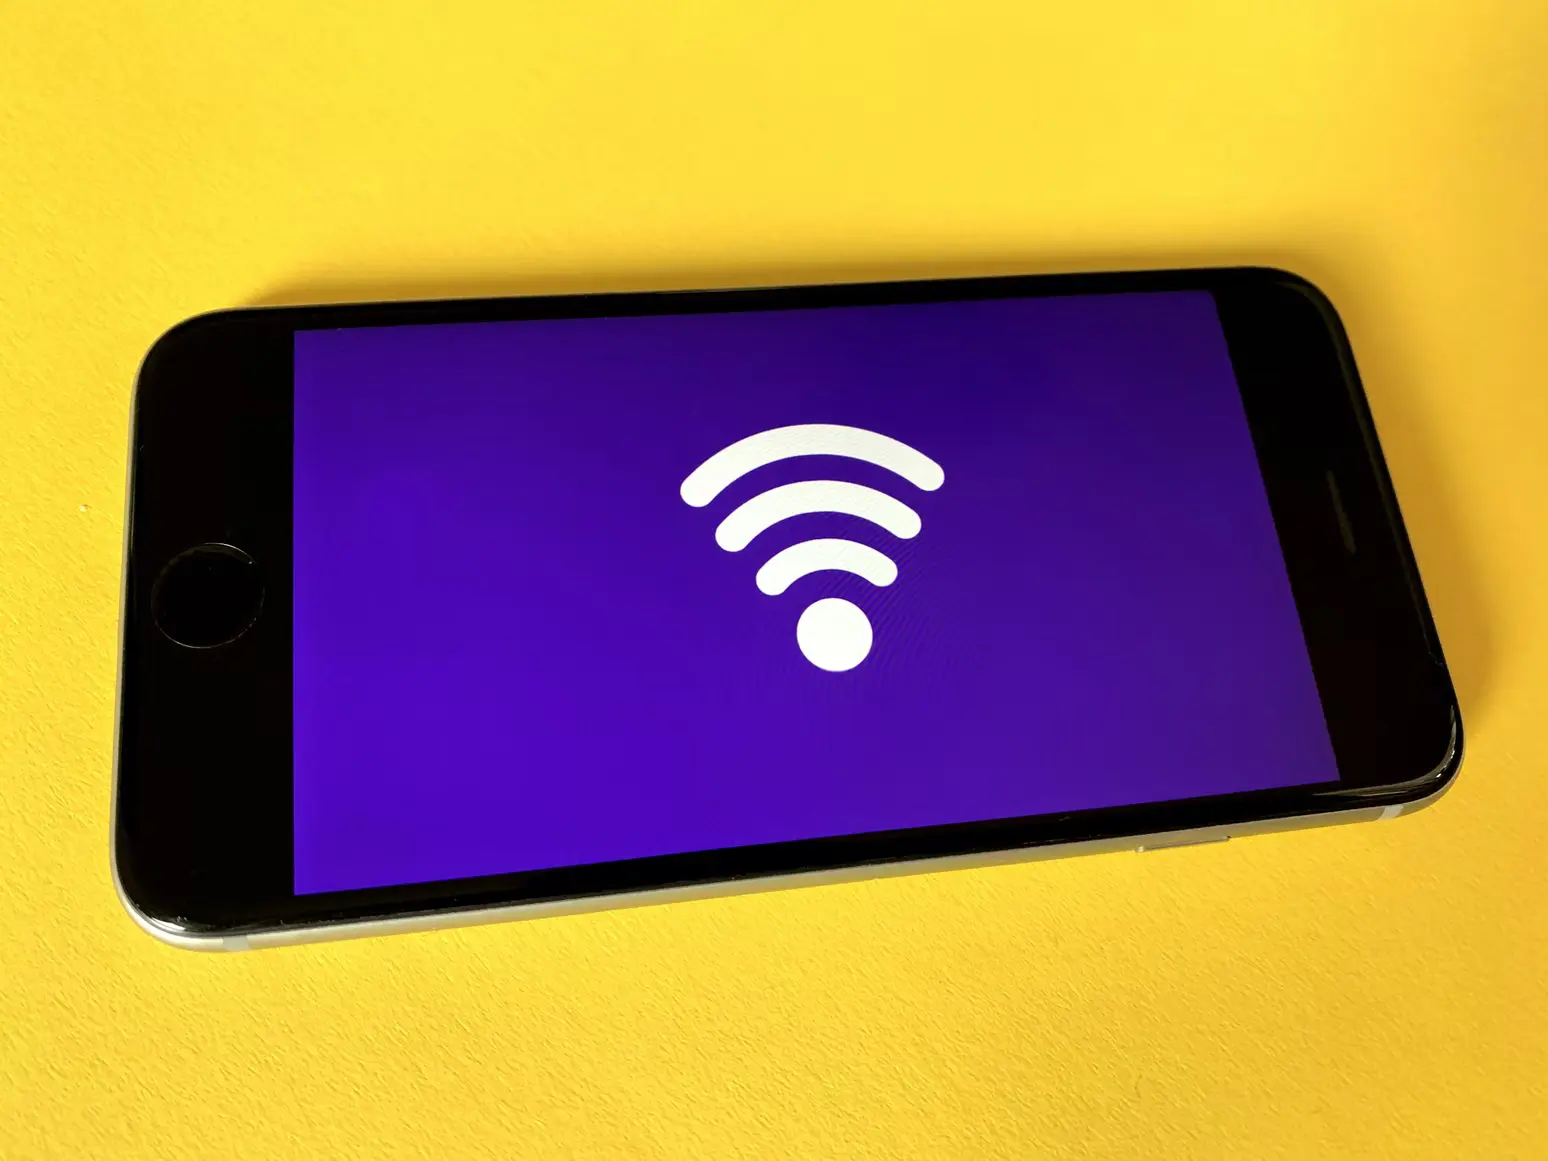 Should you turn up the Transmit Power on the Wi-Fi router